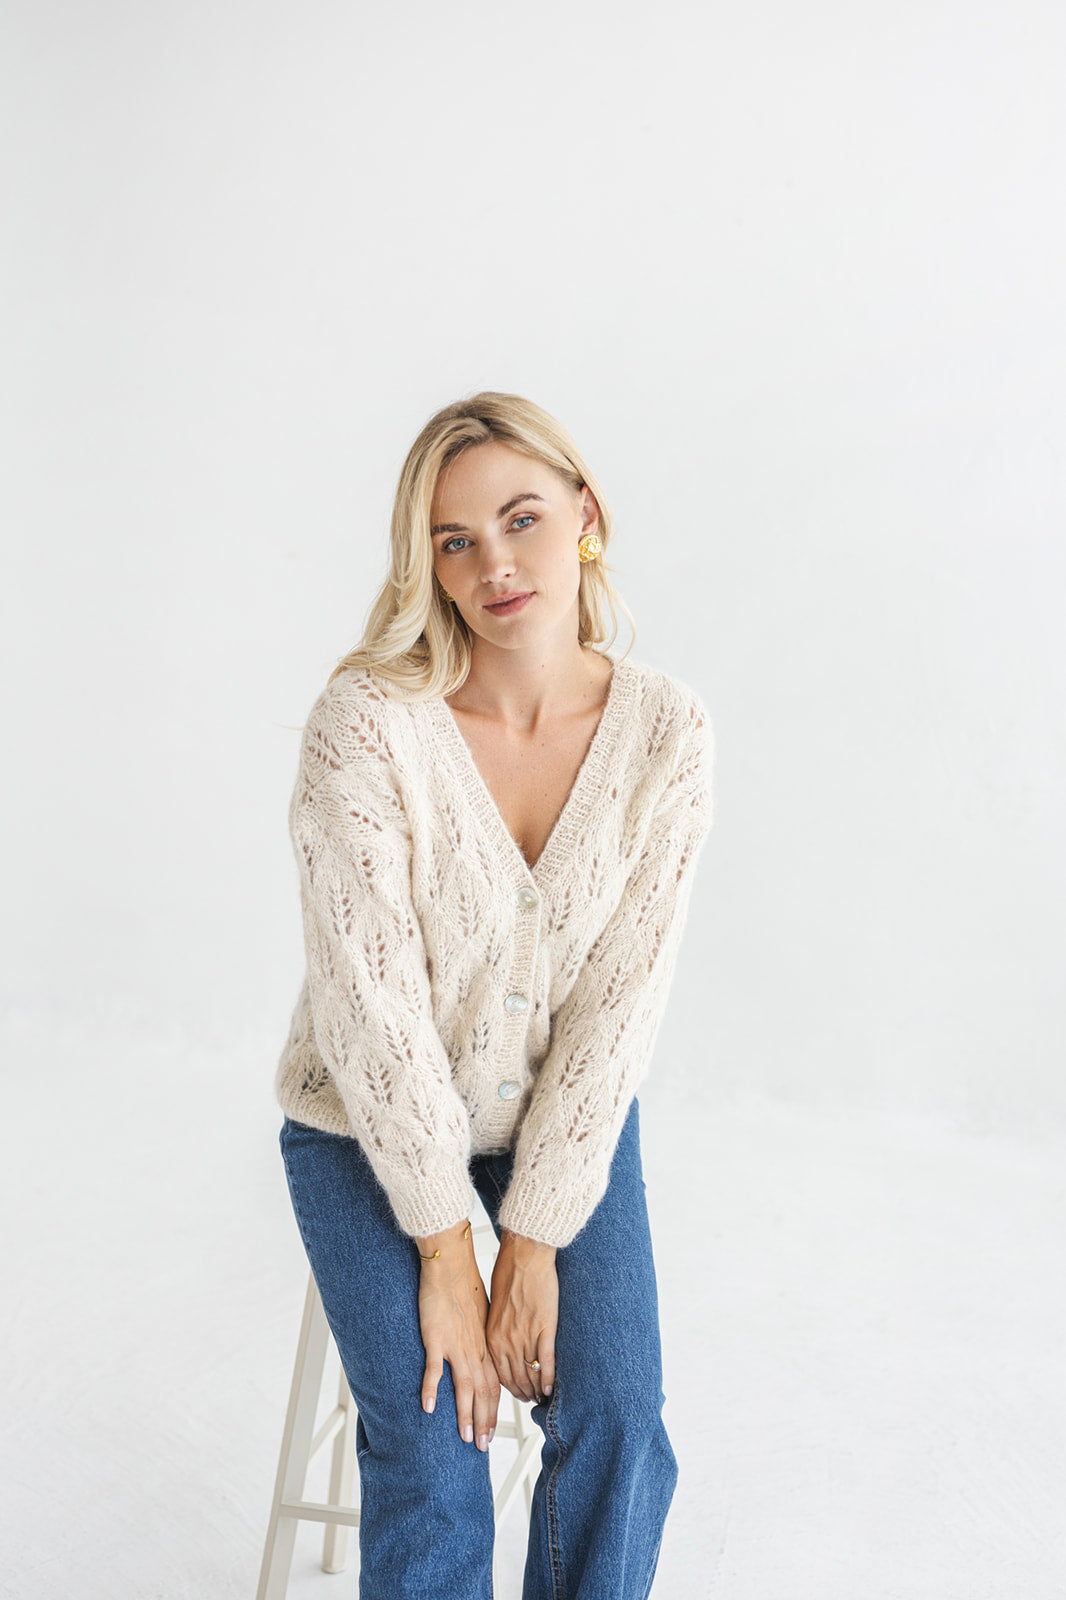 White see-through knitted alpaca cardigan, cable knit lightweight sweater with buttons, Scandinavian regular fit minimalist wedding jacket